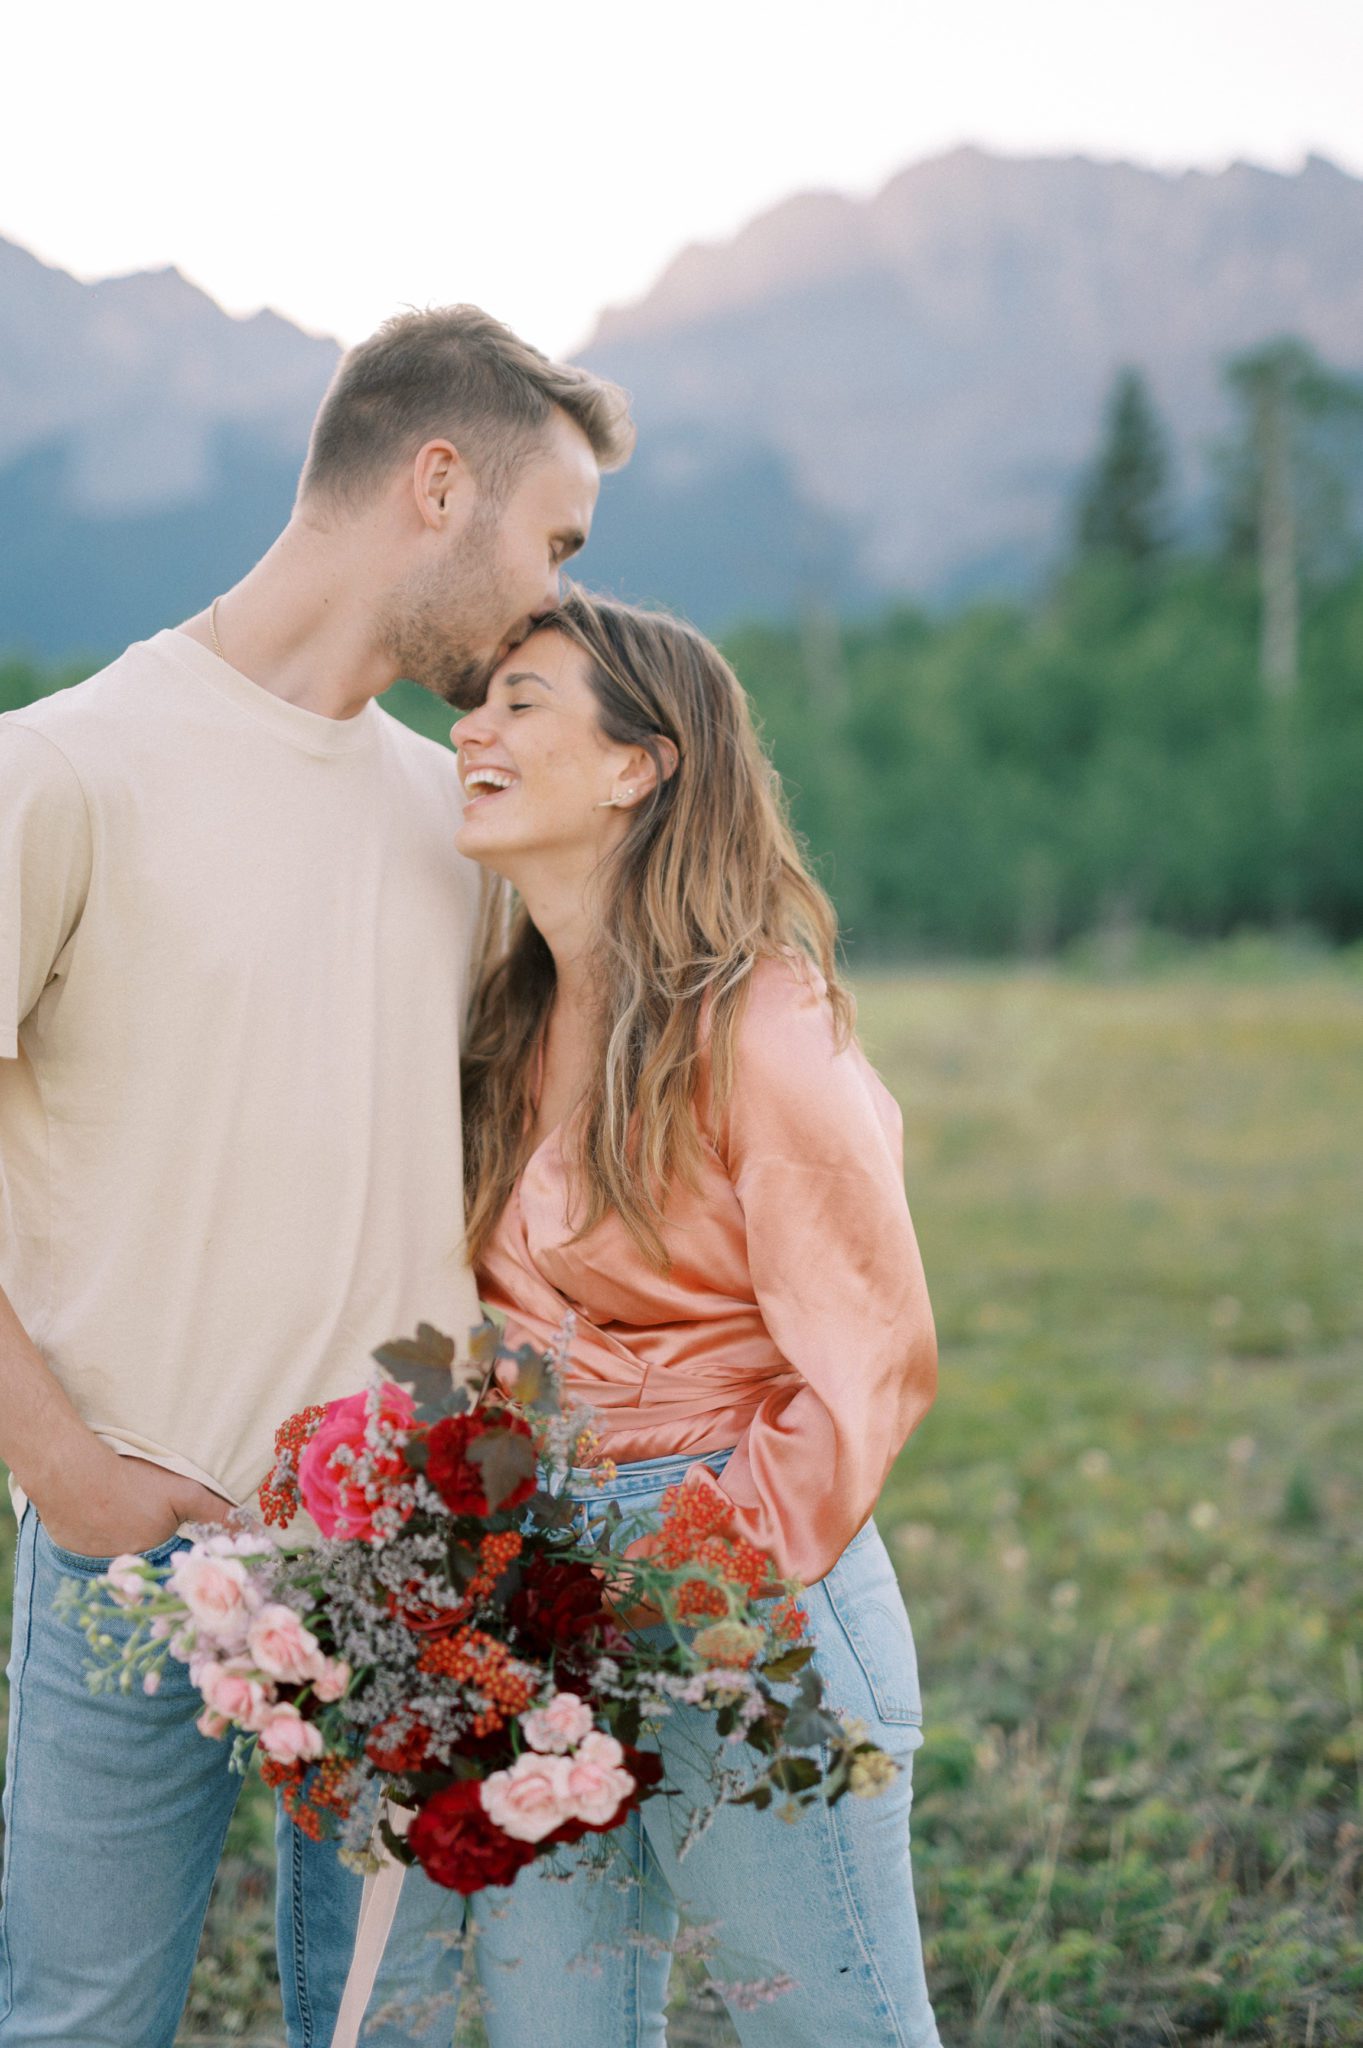 Couples session in the mountains featuring a vibrant bouquet with pink and berry hues